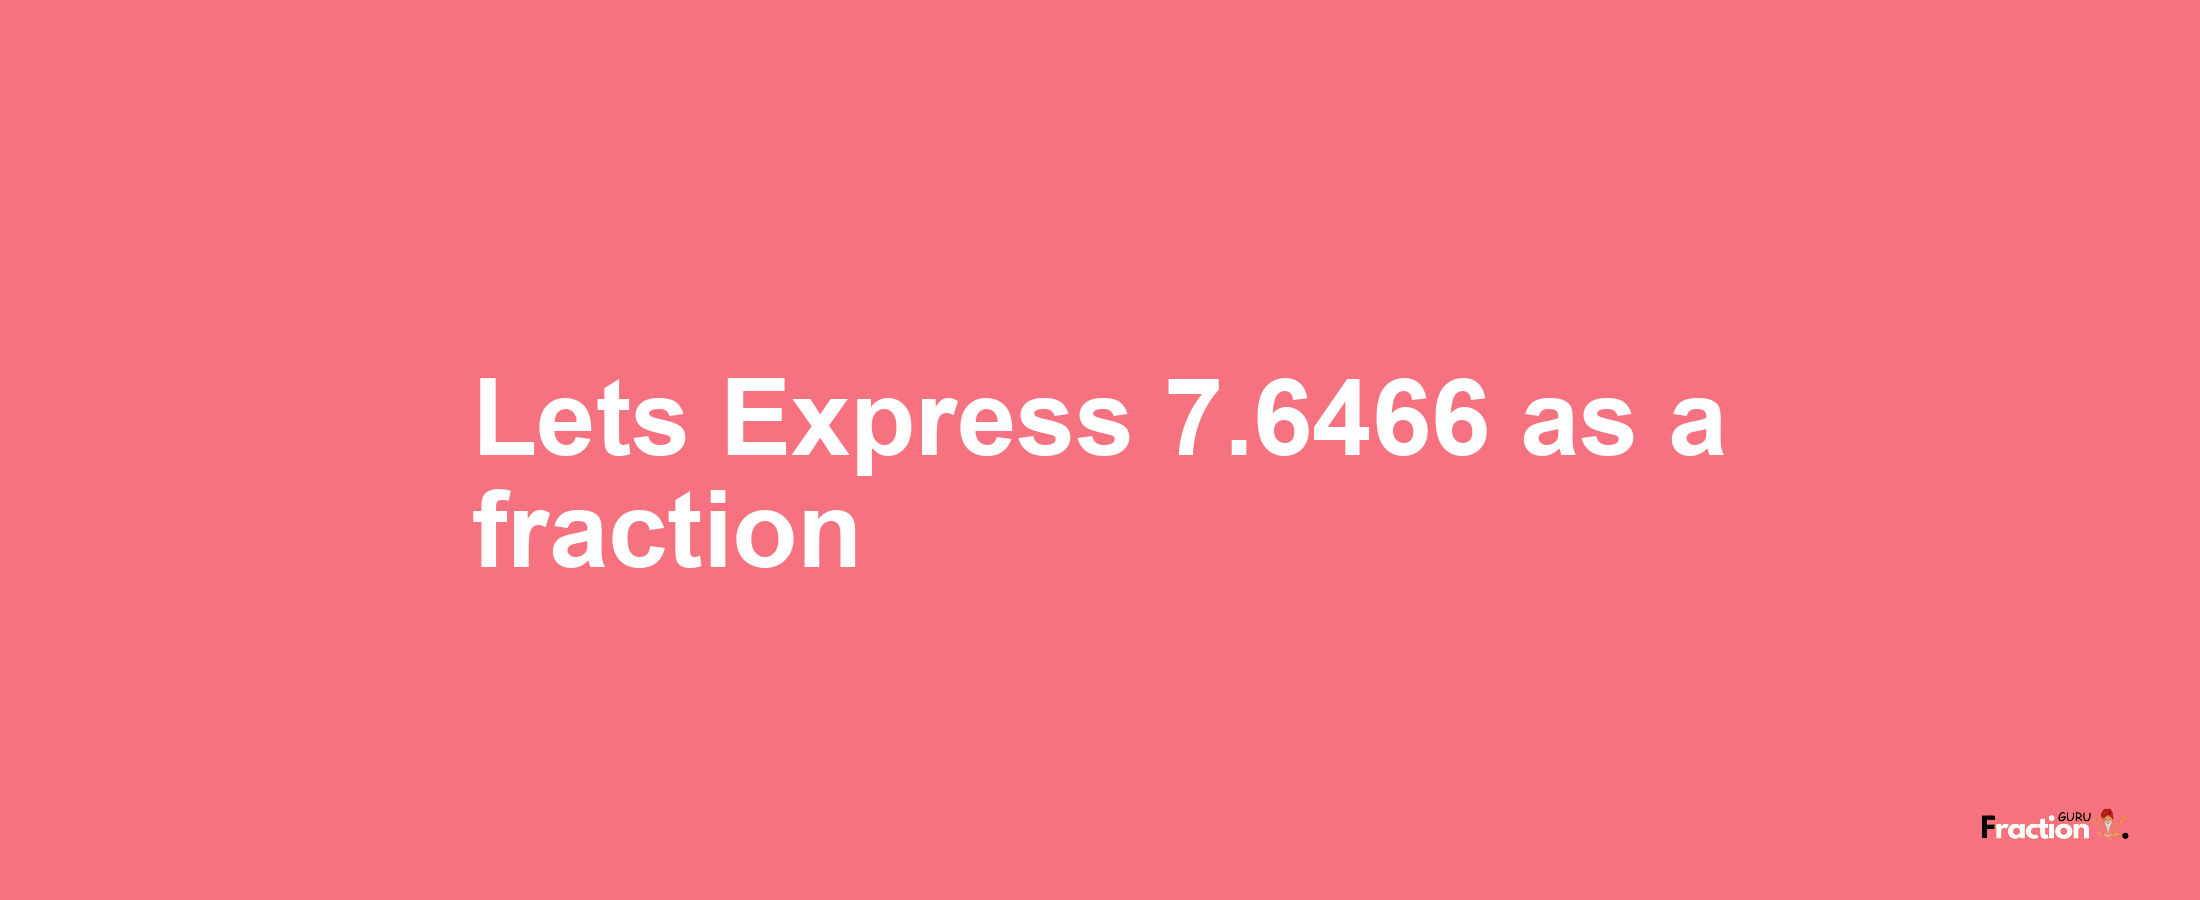 Lets Express 7.6466 as afraction